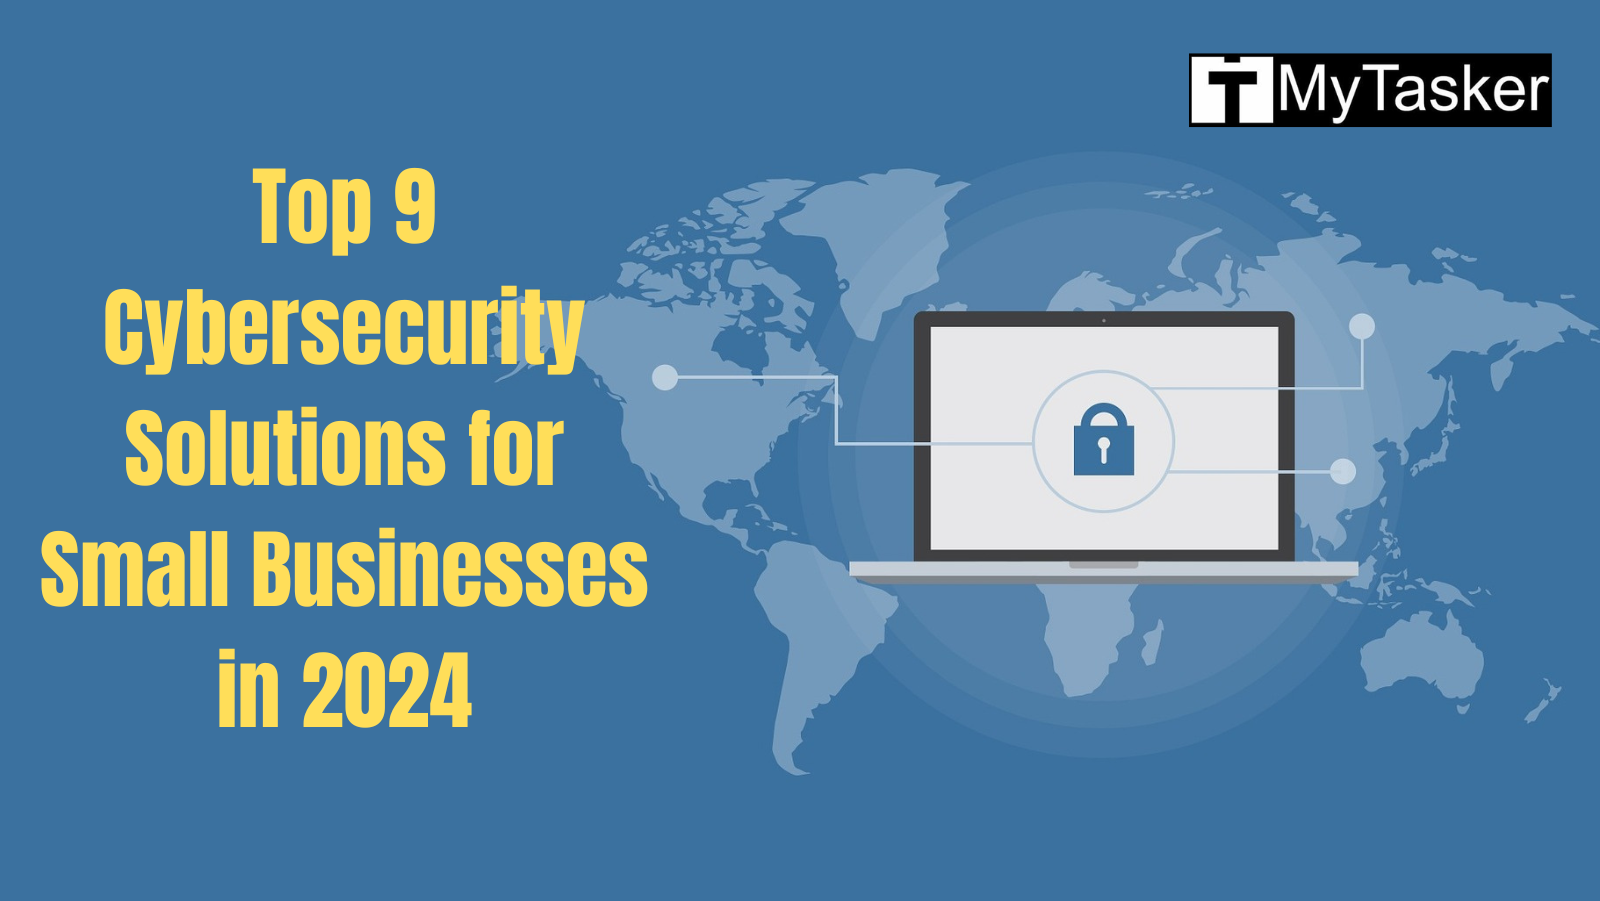 Top 9 Cybersecurity Solutions for Small Businesses in 2024